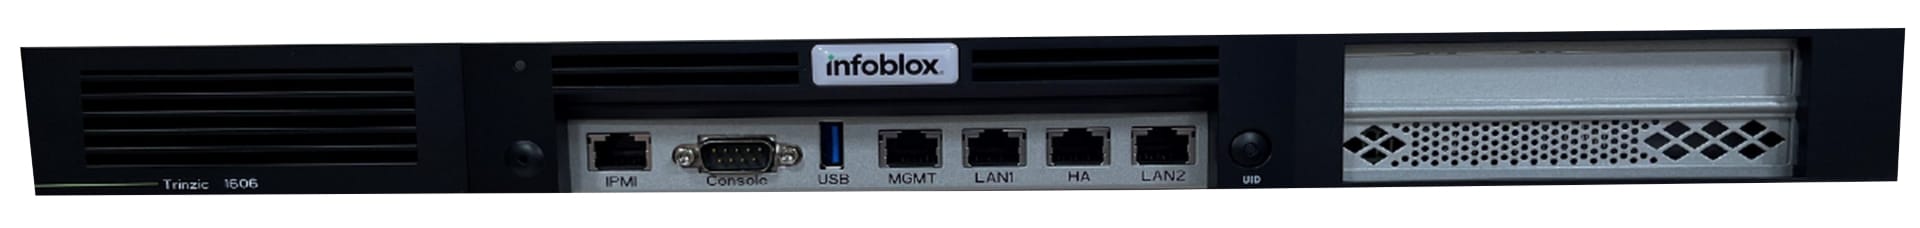 Infoblox Trinzic X6 1606 Hardware Appliance with Two Hard Drive